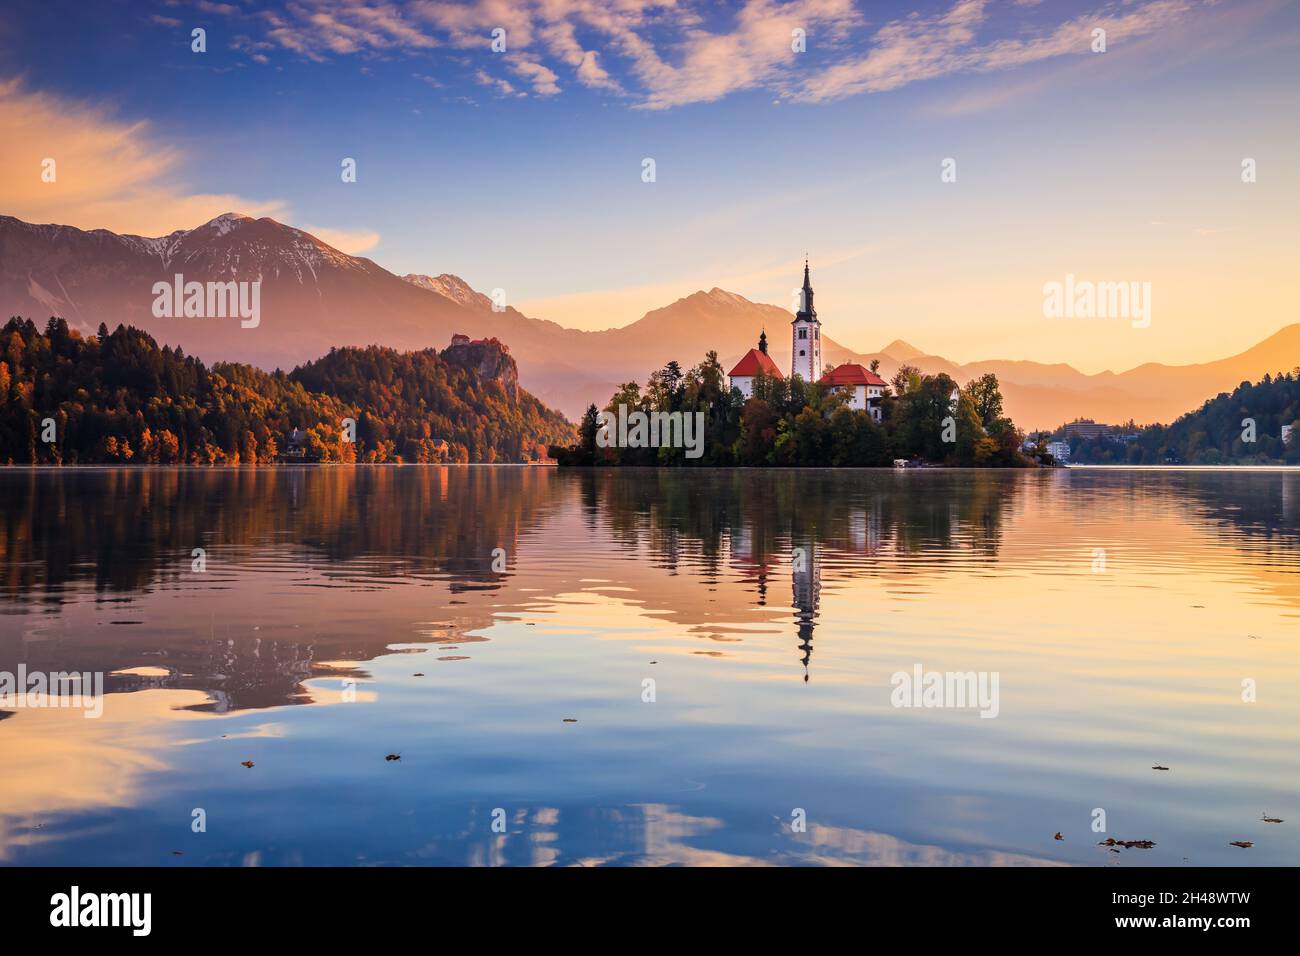 Lake Bled, Slovenia. Sunrise at Lake Bled with famous Bled Island and historic Bled Castle in the background. Stock Photo